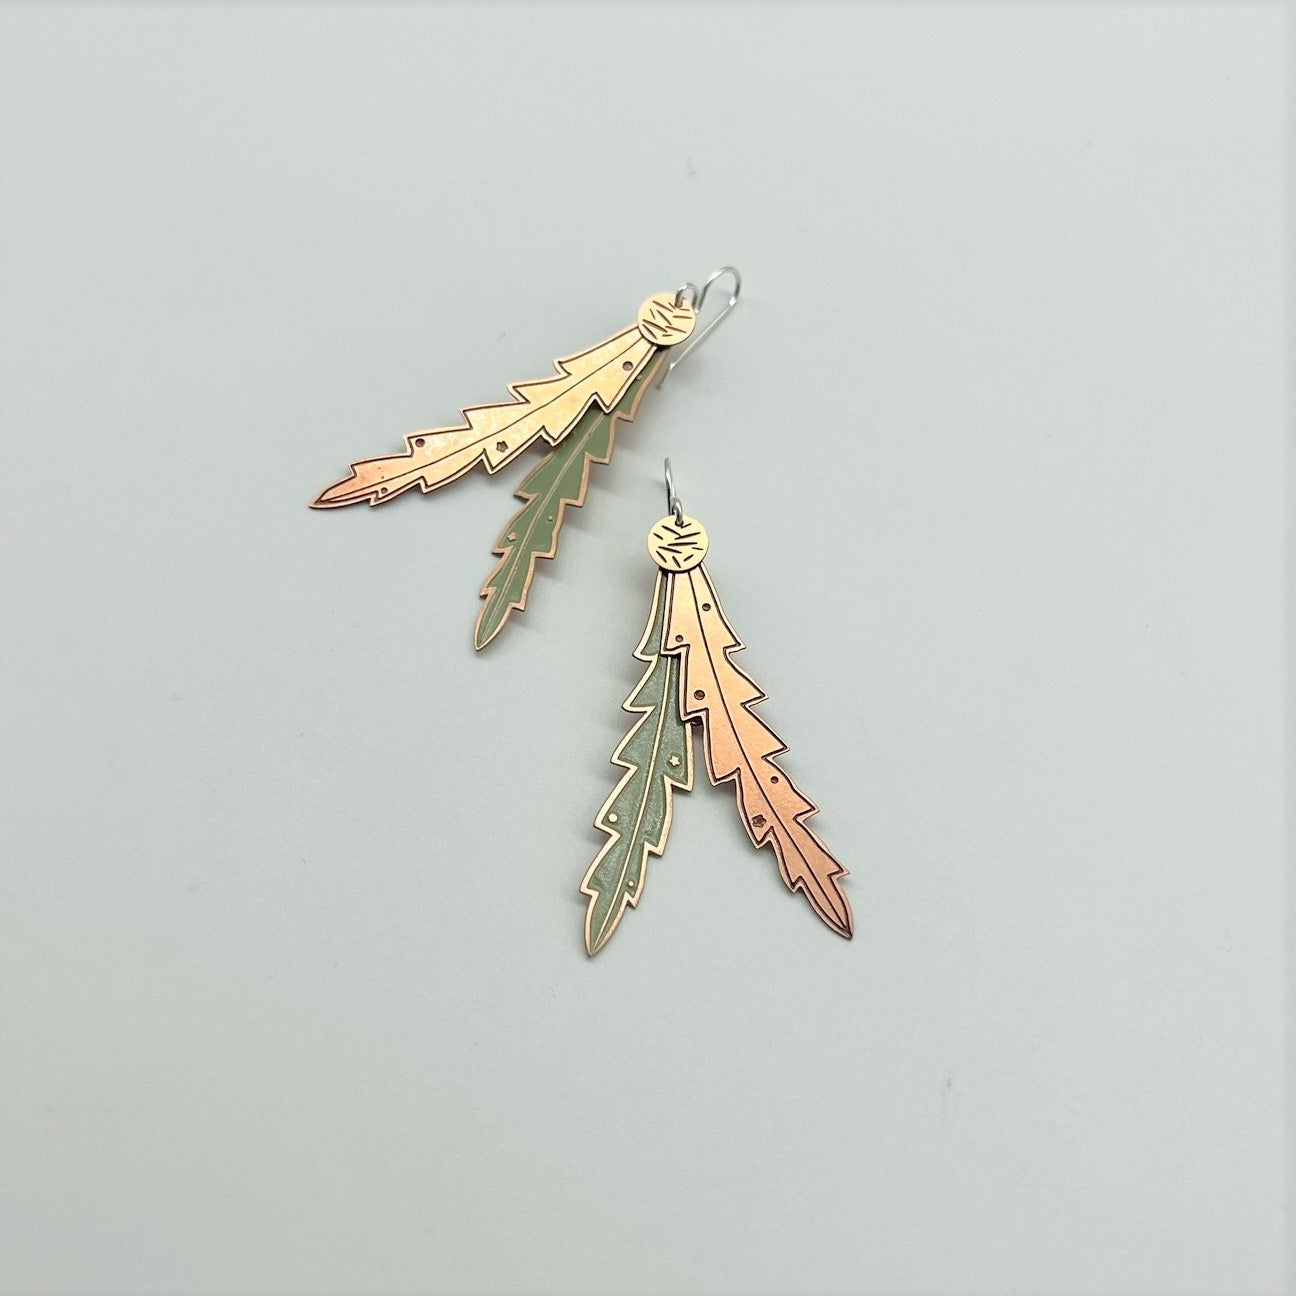 Jessica Jubb -  Limited Edition 'Banksia plus Dot' Hand Painted Copper Earrings with Sterling Silver Hooks (jju058)